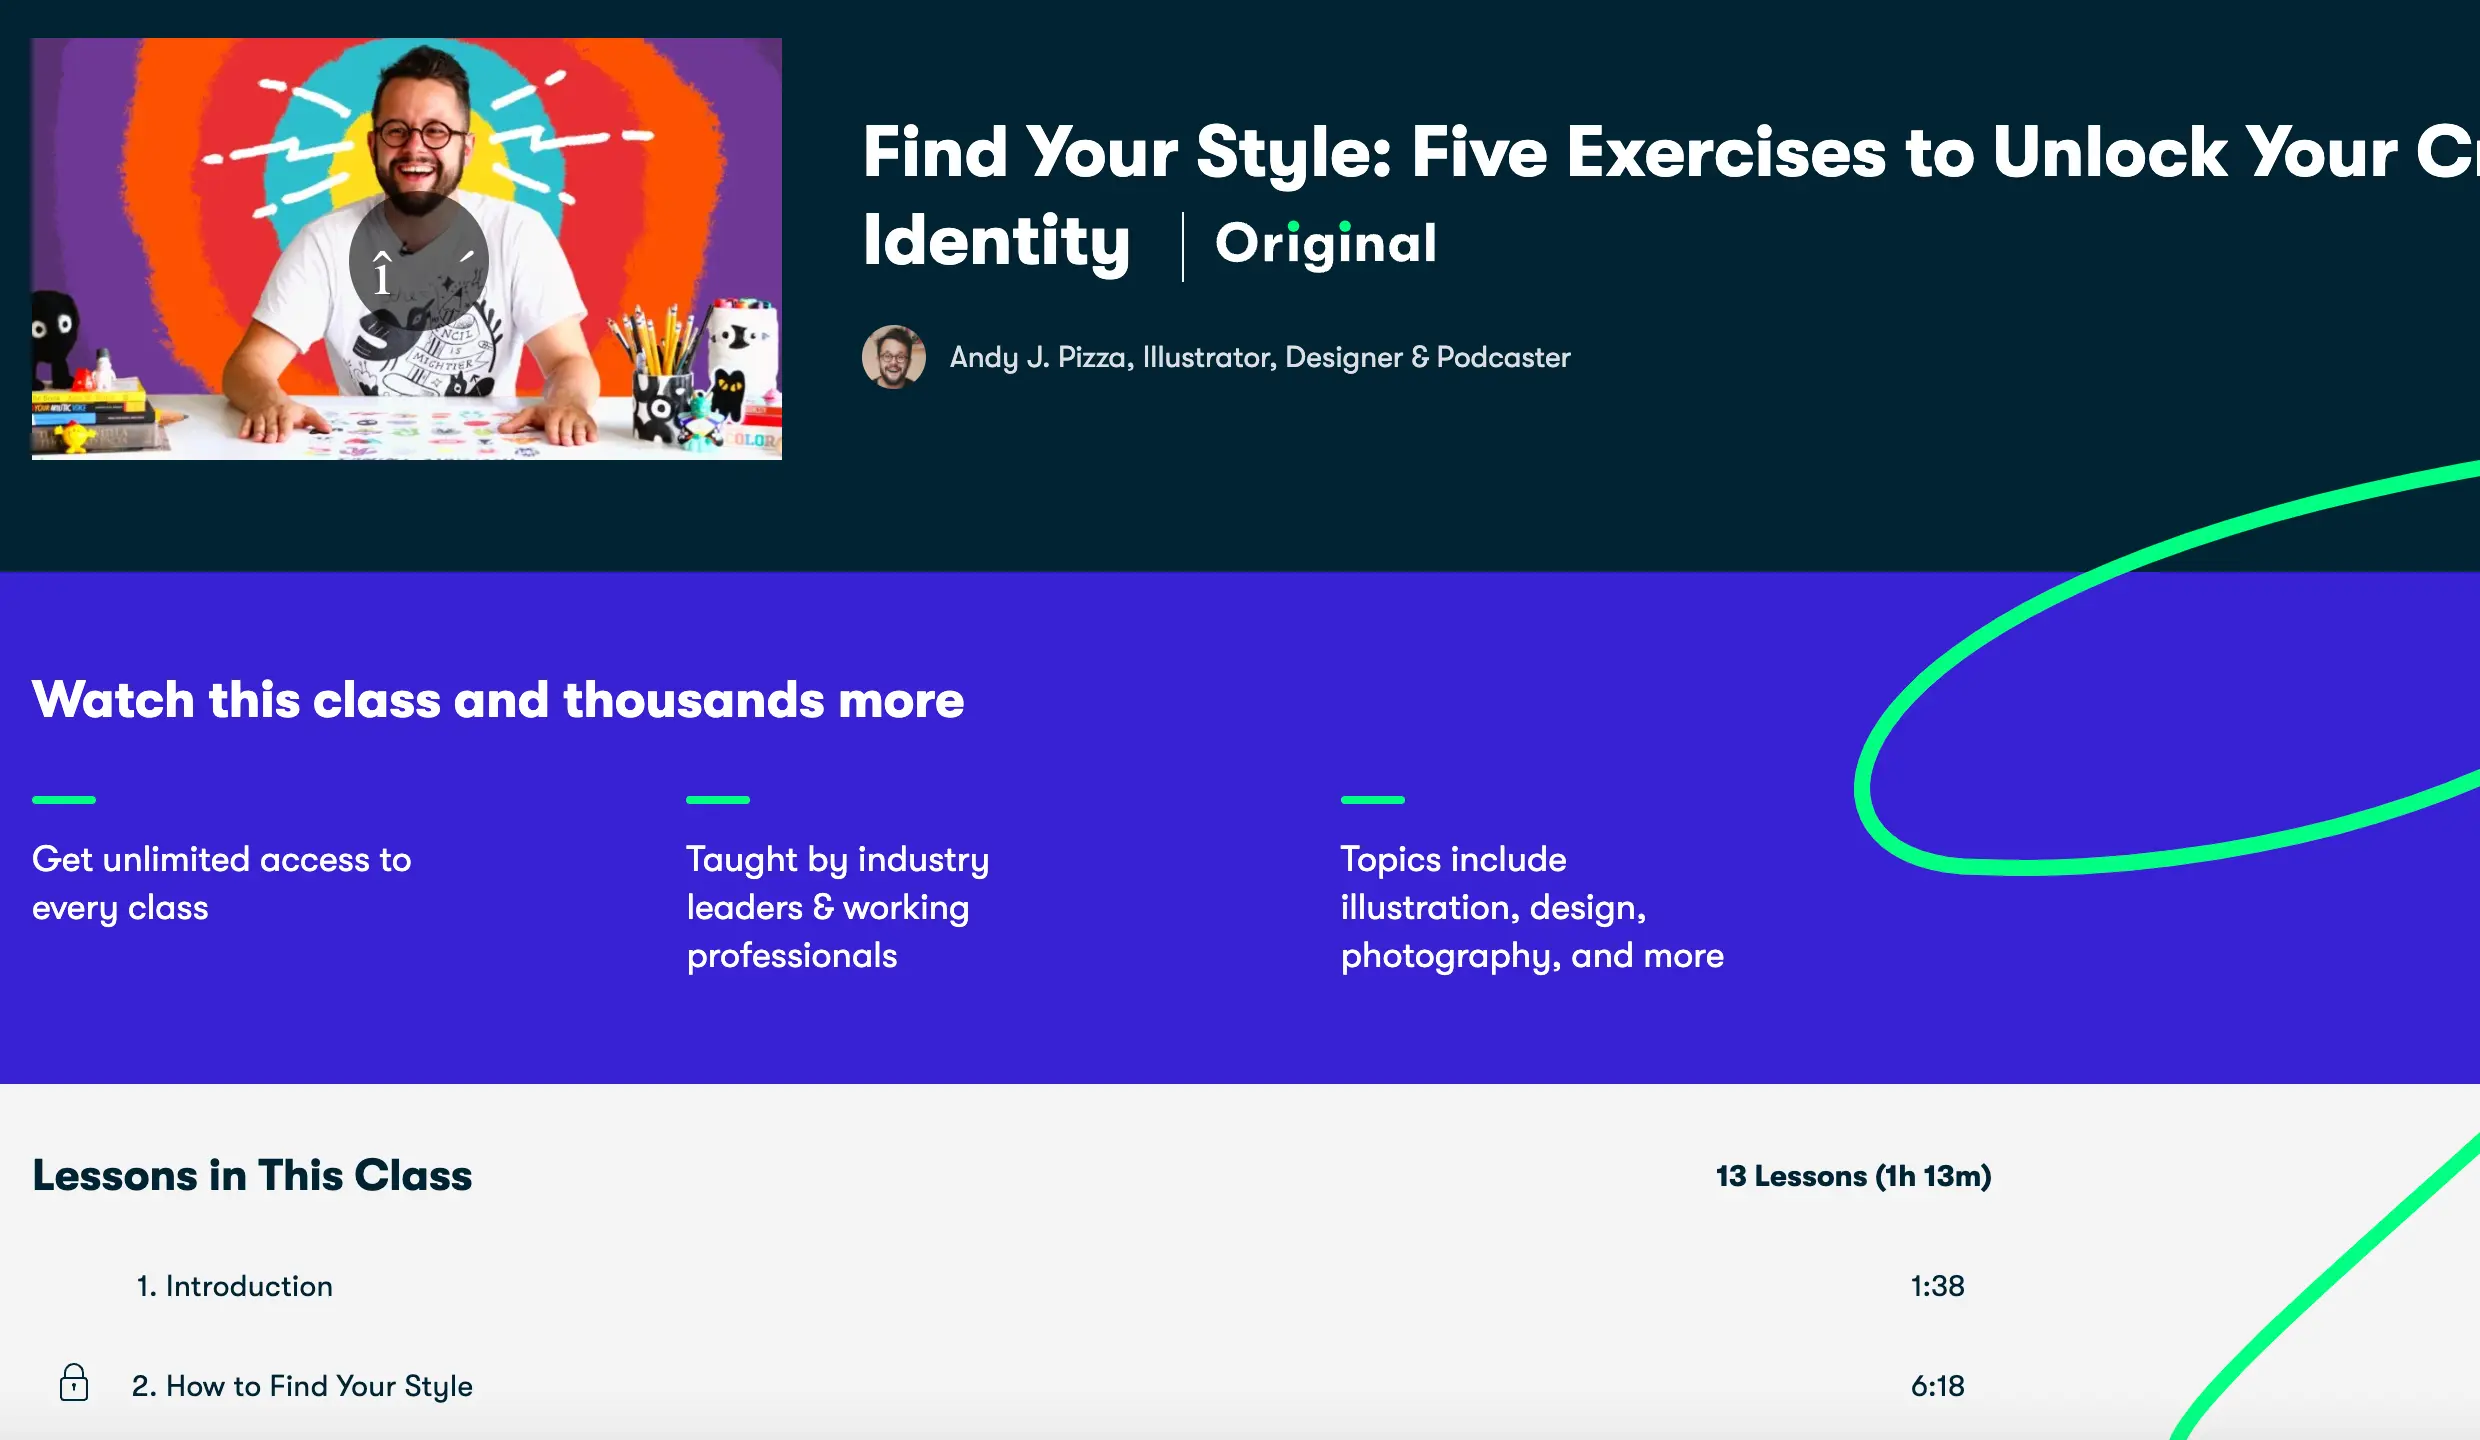 Find Your Style: Five Exercises to Unlock Your Creative Identity